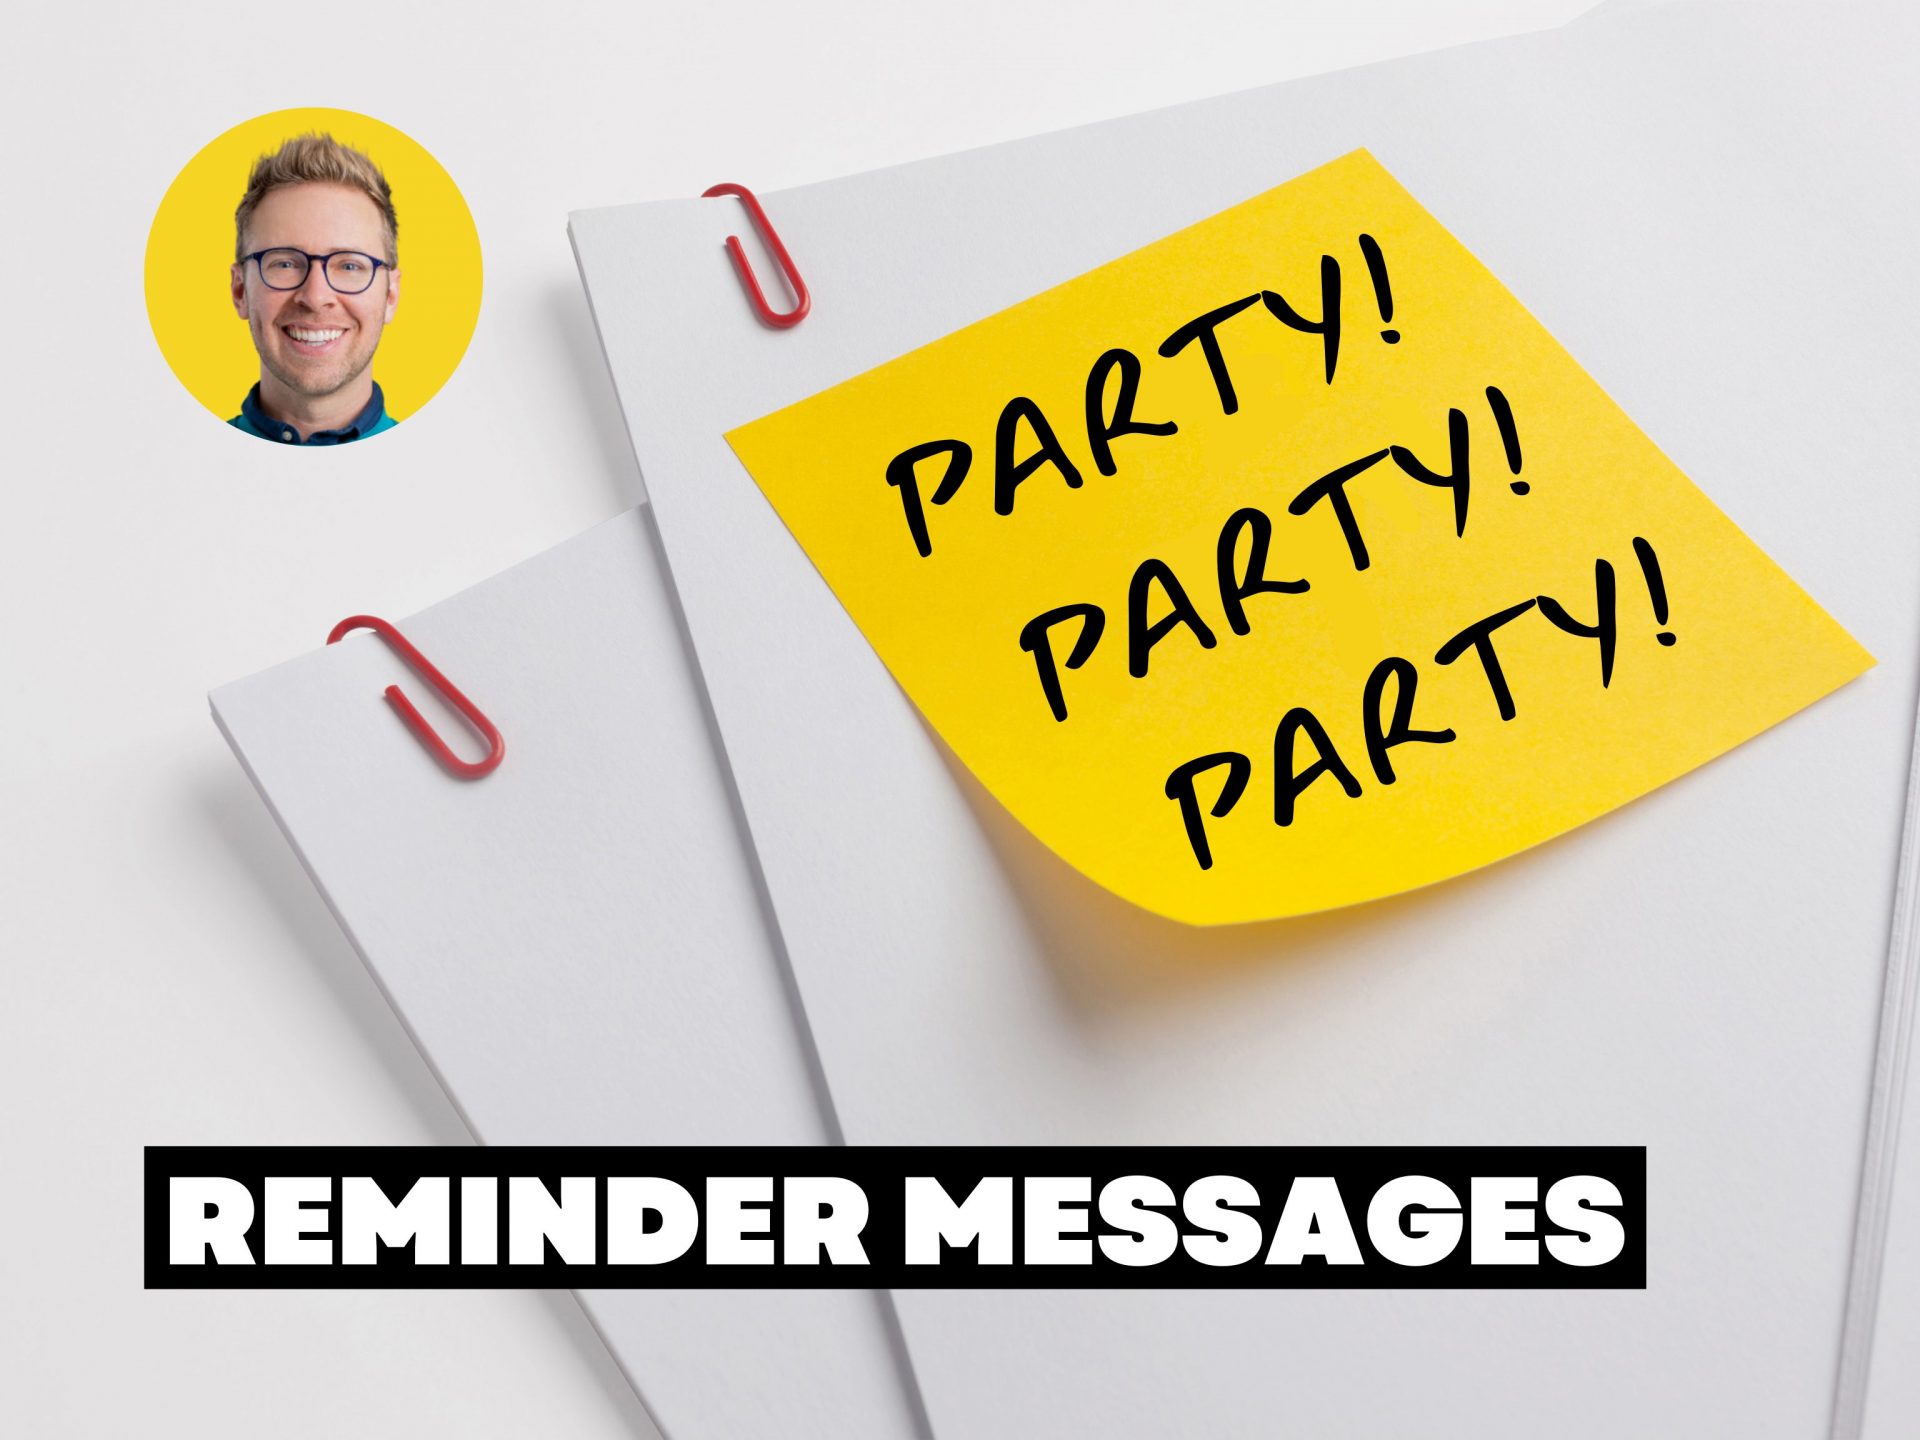 How To Send Reminder For Birthday Party